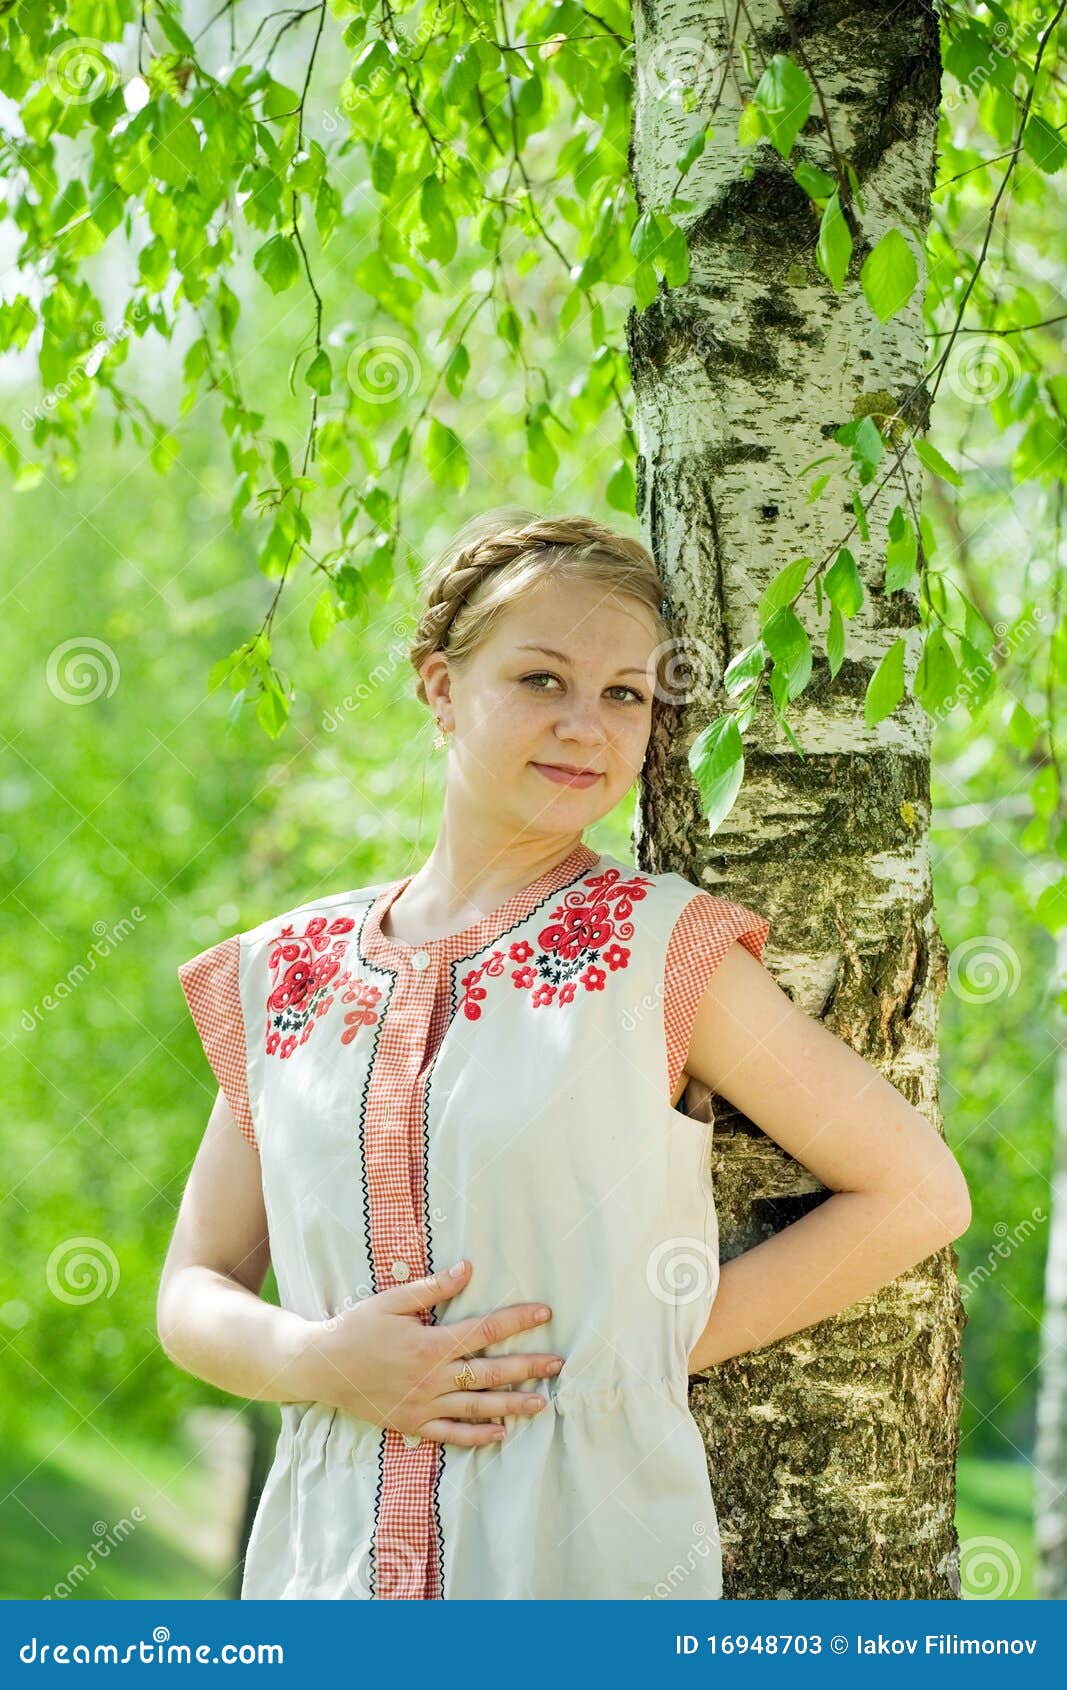 Girl in Traditional Clothes Stock Image - Image of hairstyle, outdoors ...